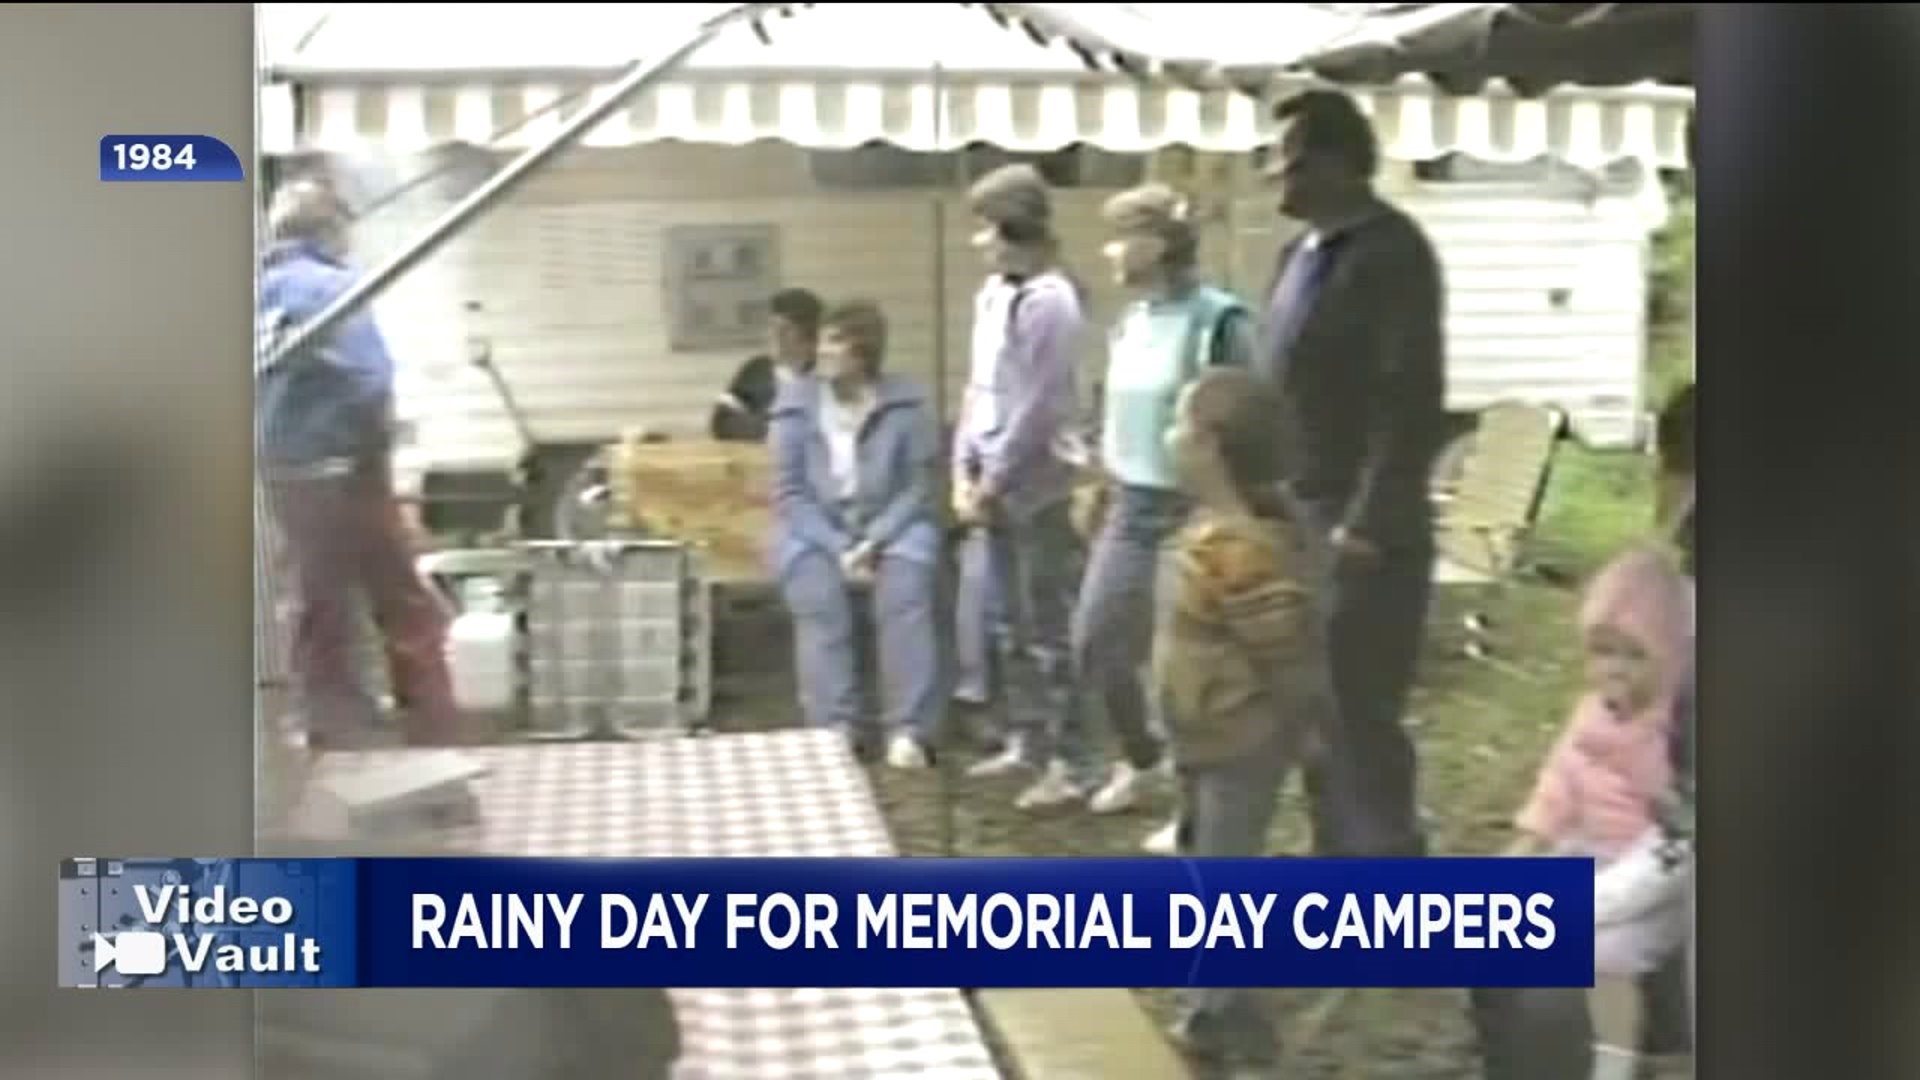 Video Vault: Rainy Day for Memorial Day Campers